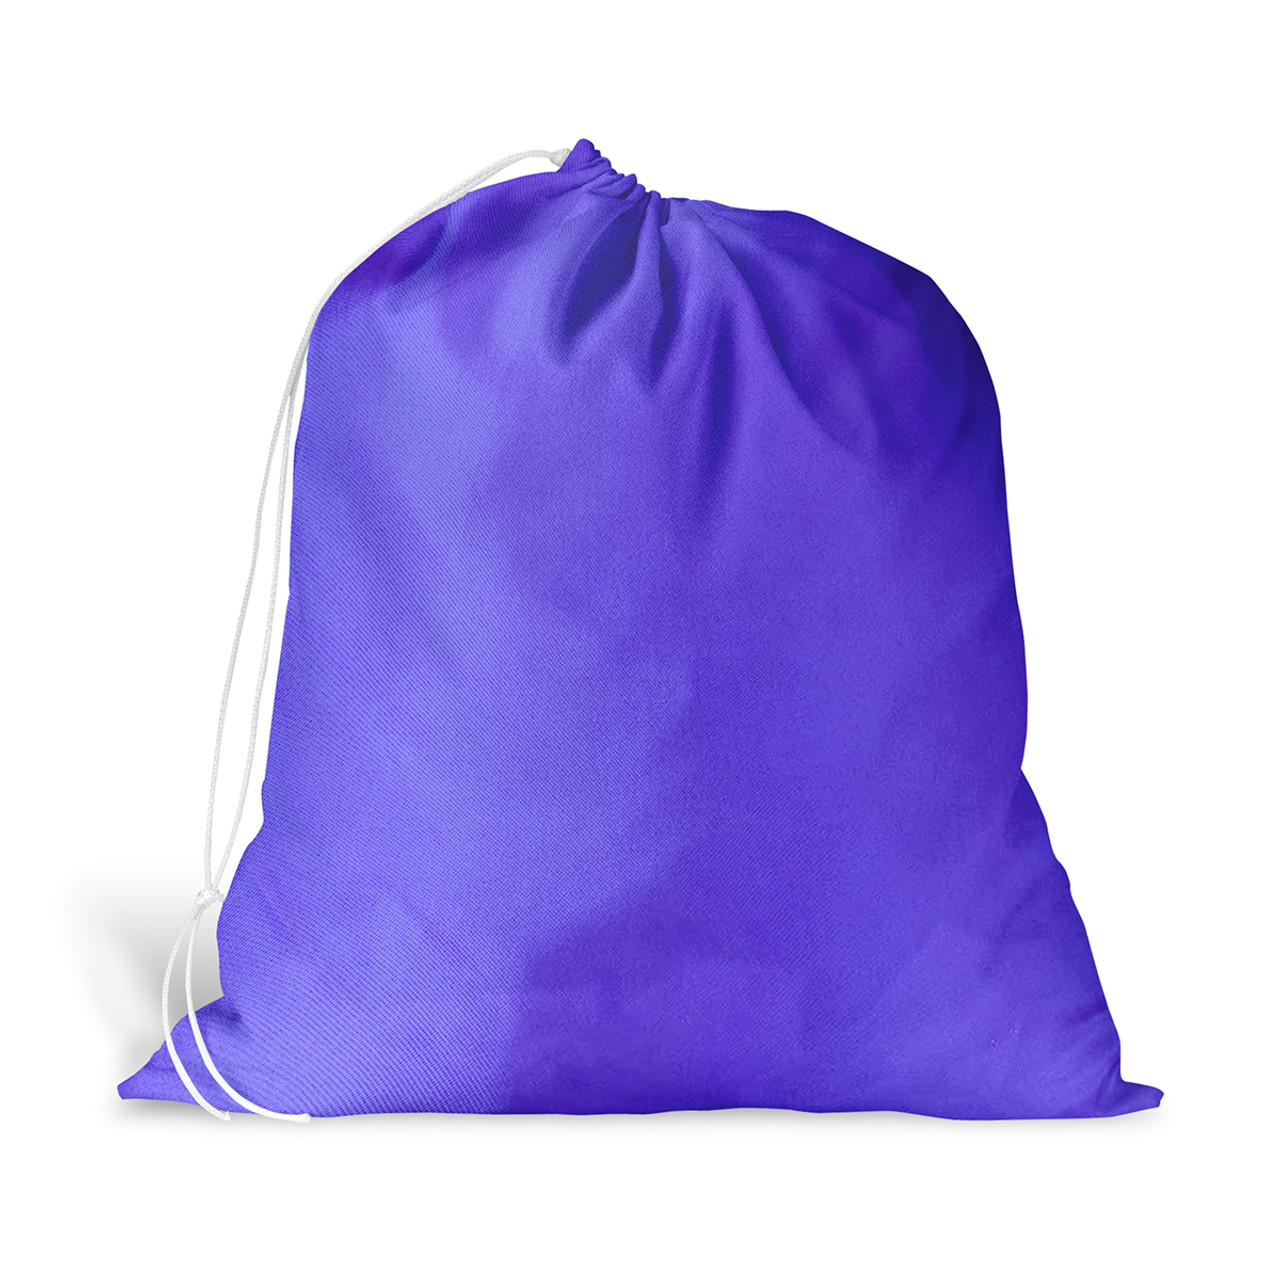 Heavy-Duty Large Nylon Clothes Laundry Bag with Drawstring Top Closure (2-Pack) product image